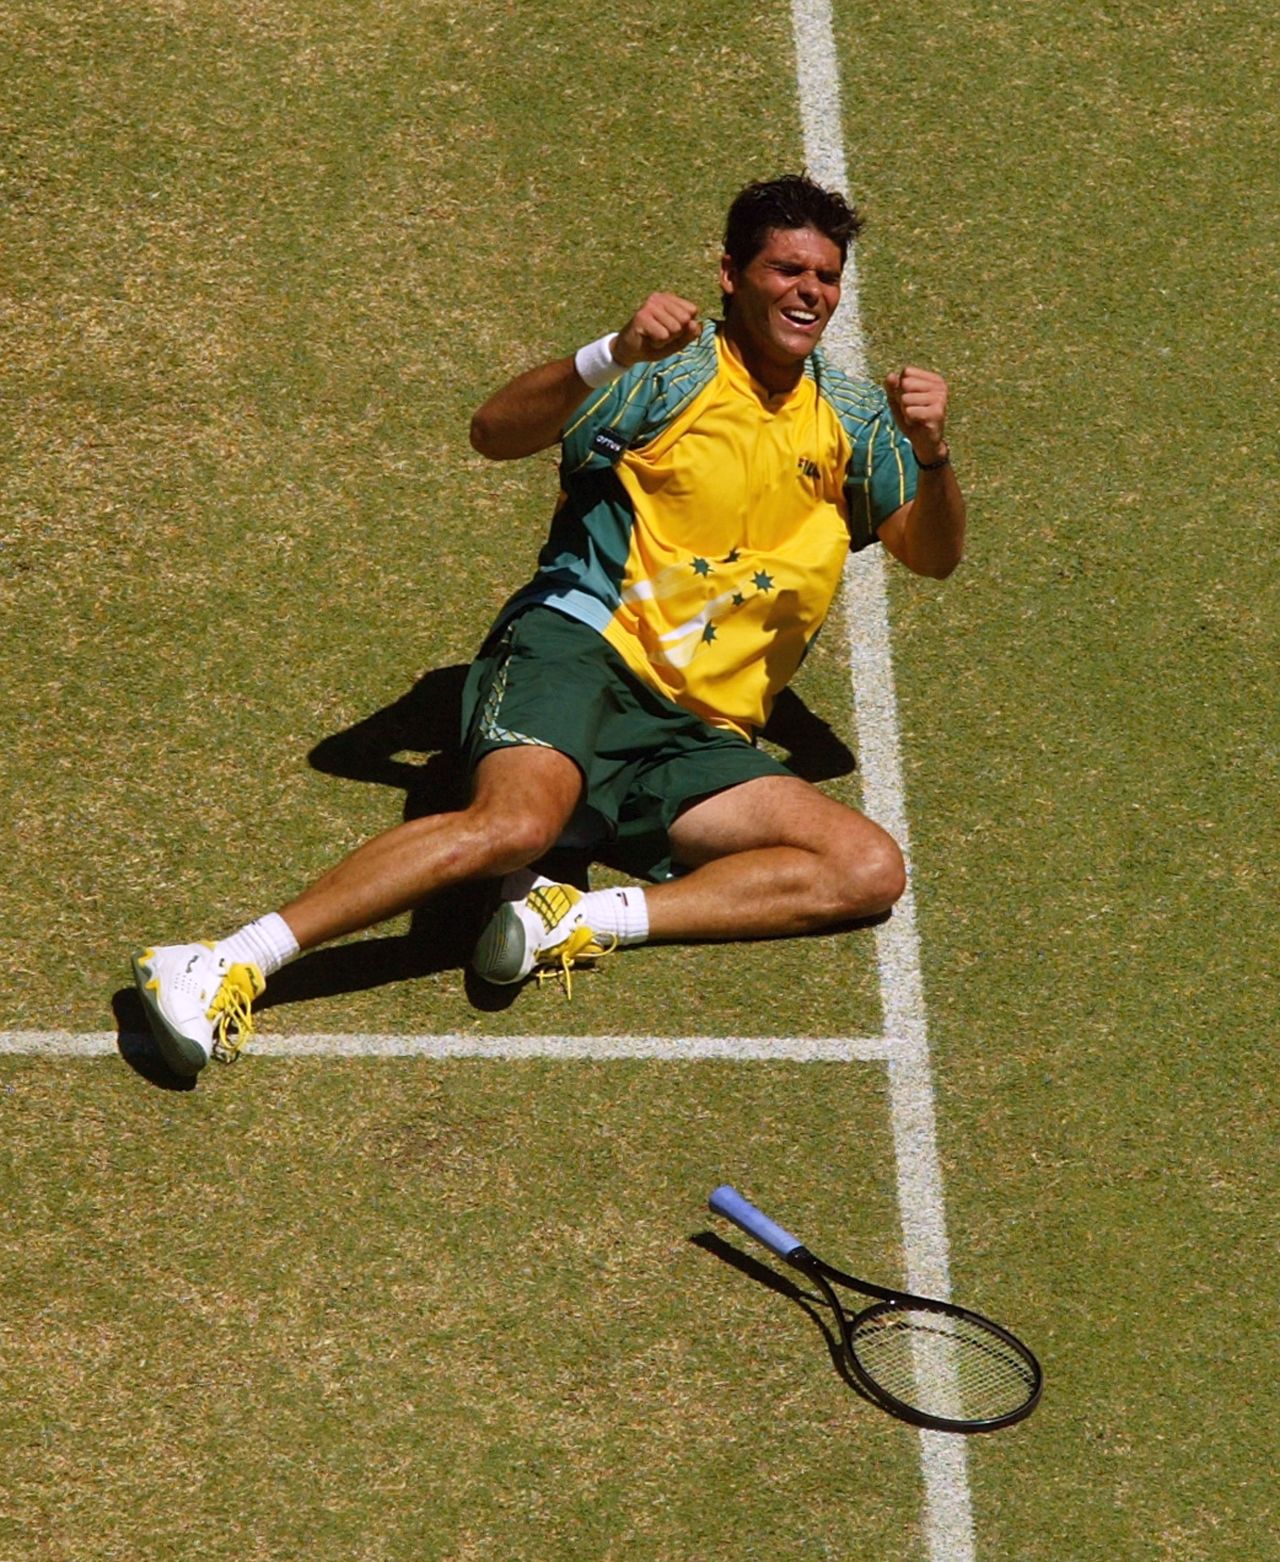 But Philippoussis made up for his Wimbledon heartache by defying a shoulder injury to beat Juan Carlos Ferrero of Spain to land the Davis Cup for Australia in front of his home town crowd in Melbourne later that year.